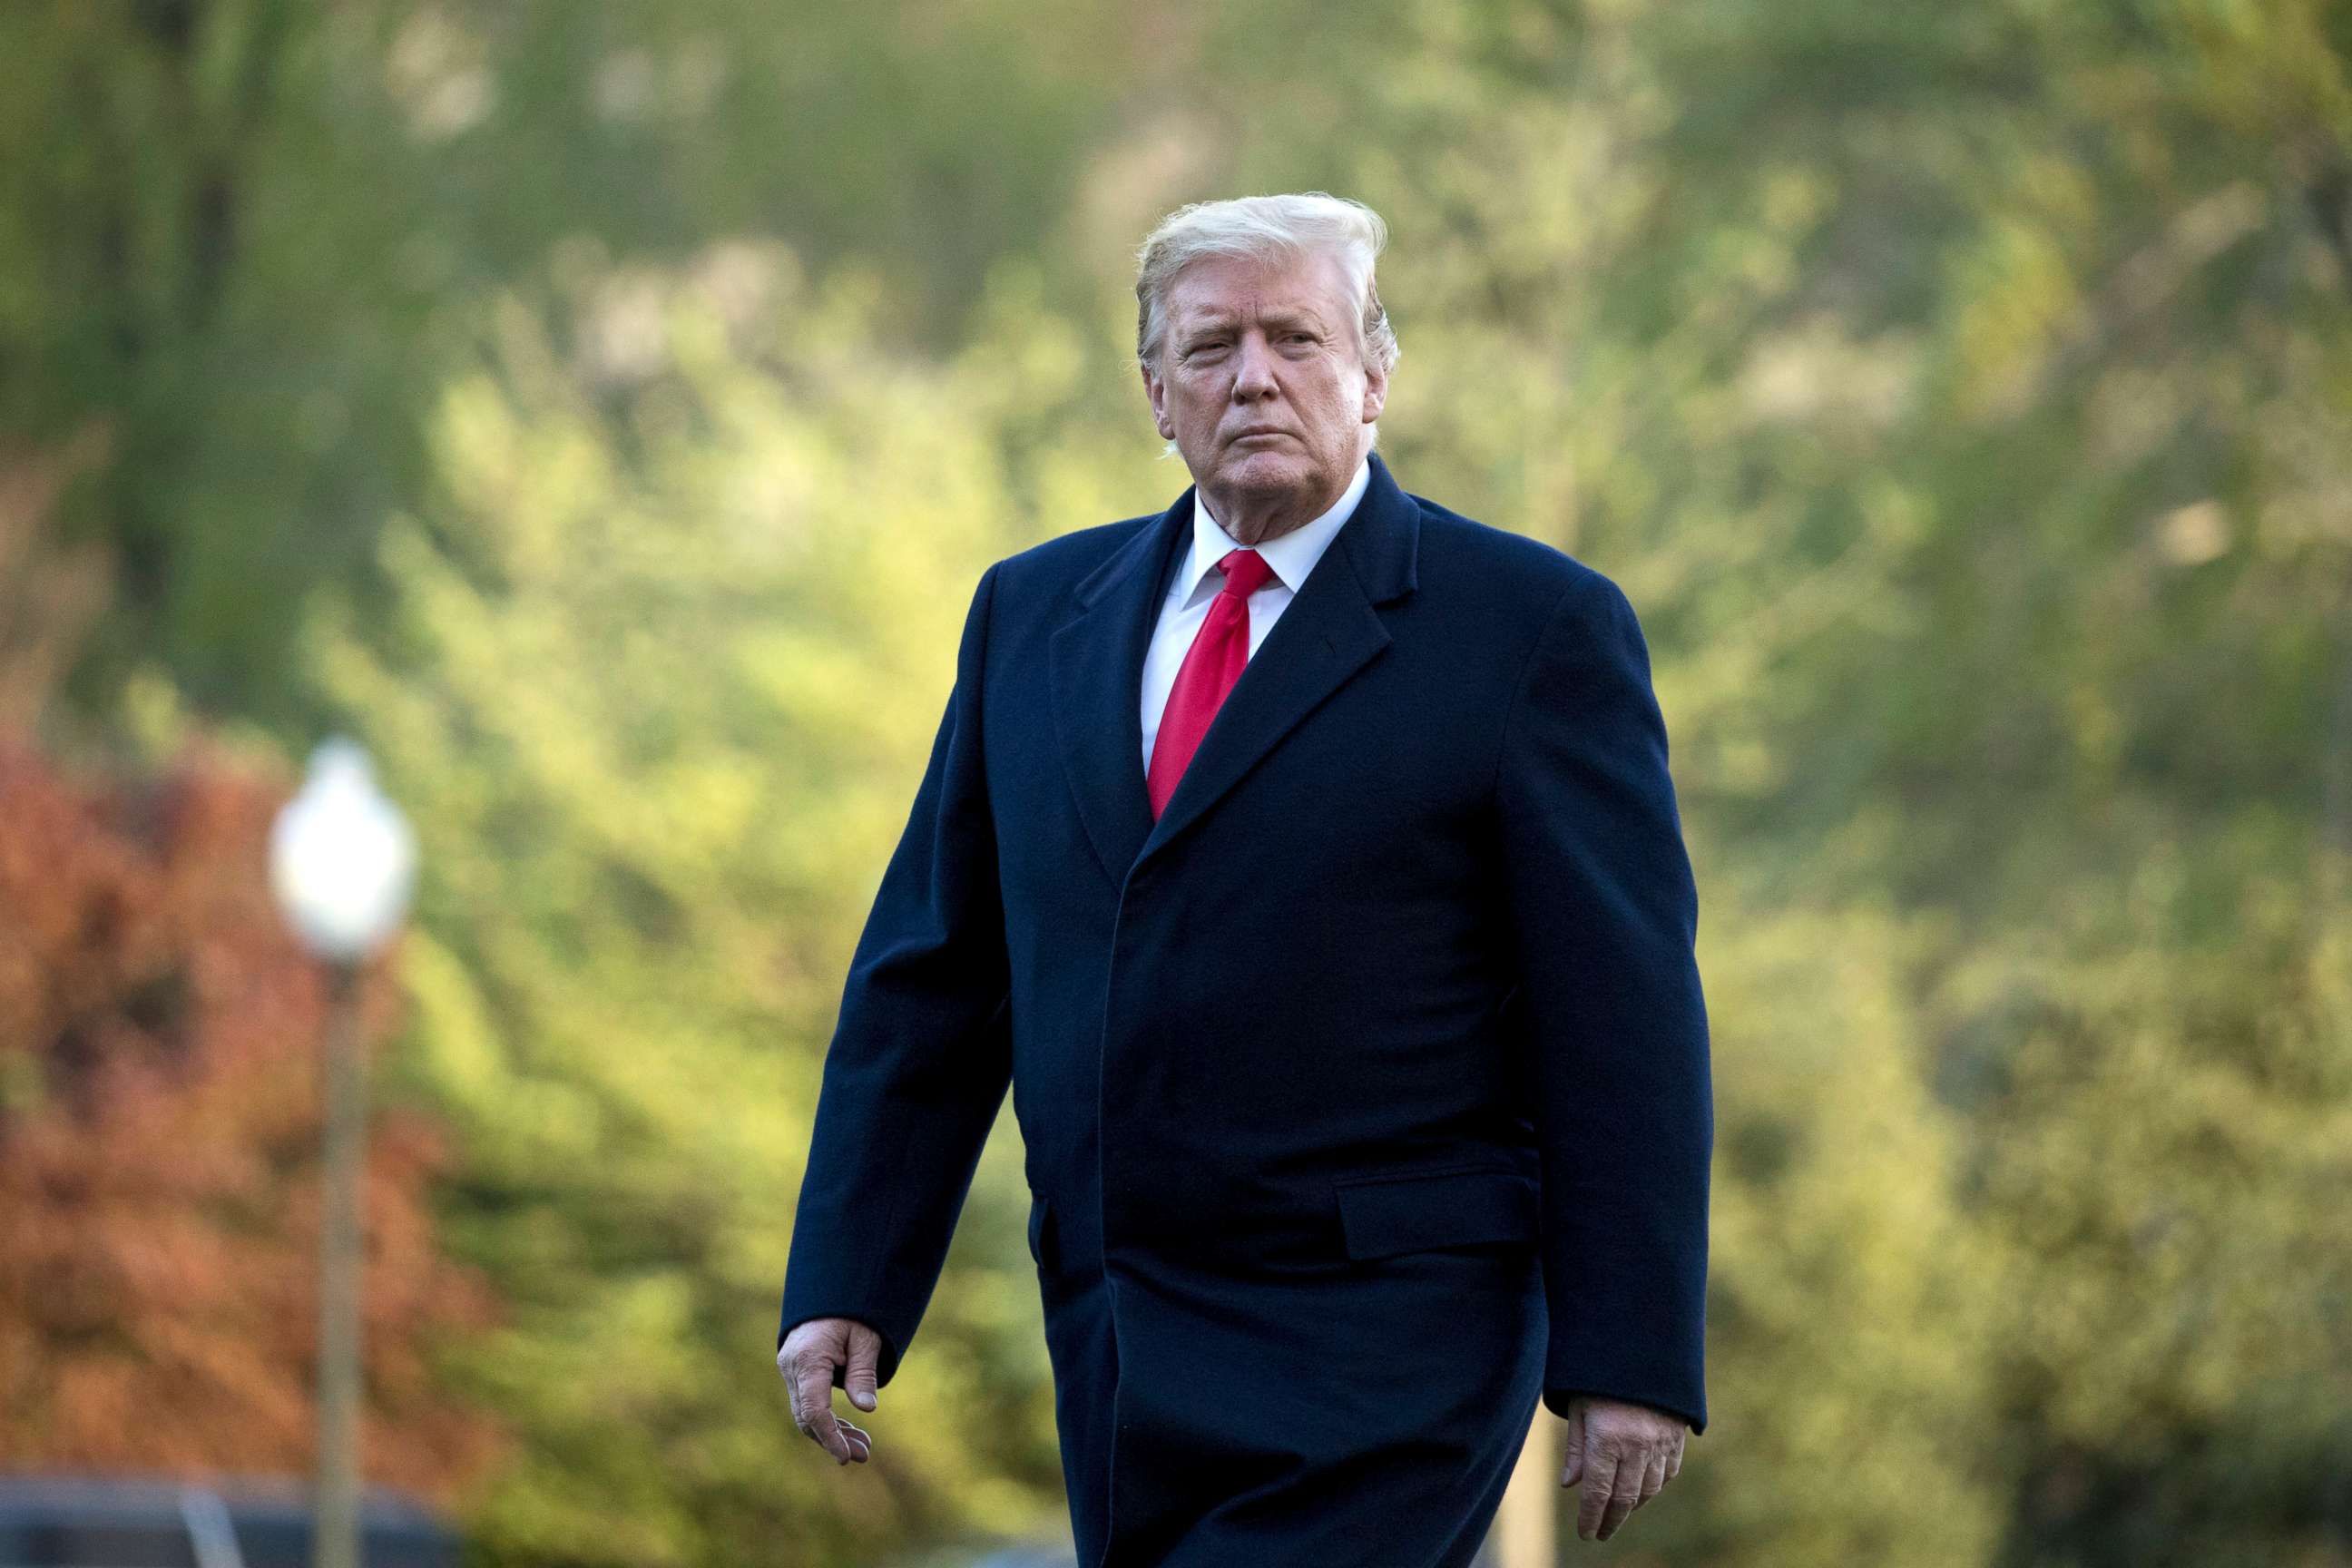 PHOTO: President Donald Trump walks on the South Lawn as he arrives at the White House in Washington, April 15, 2019.